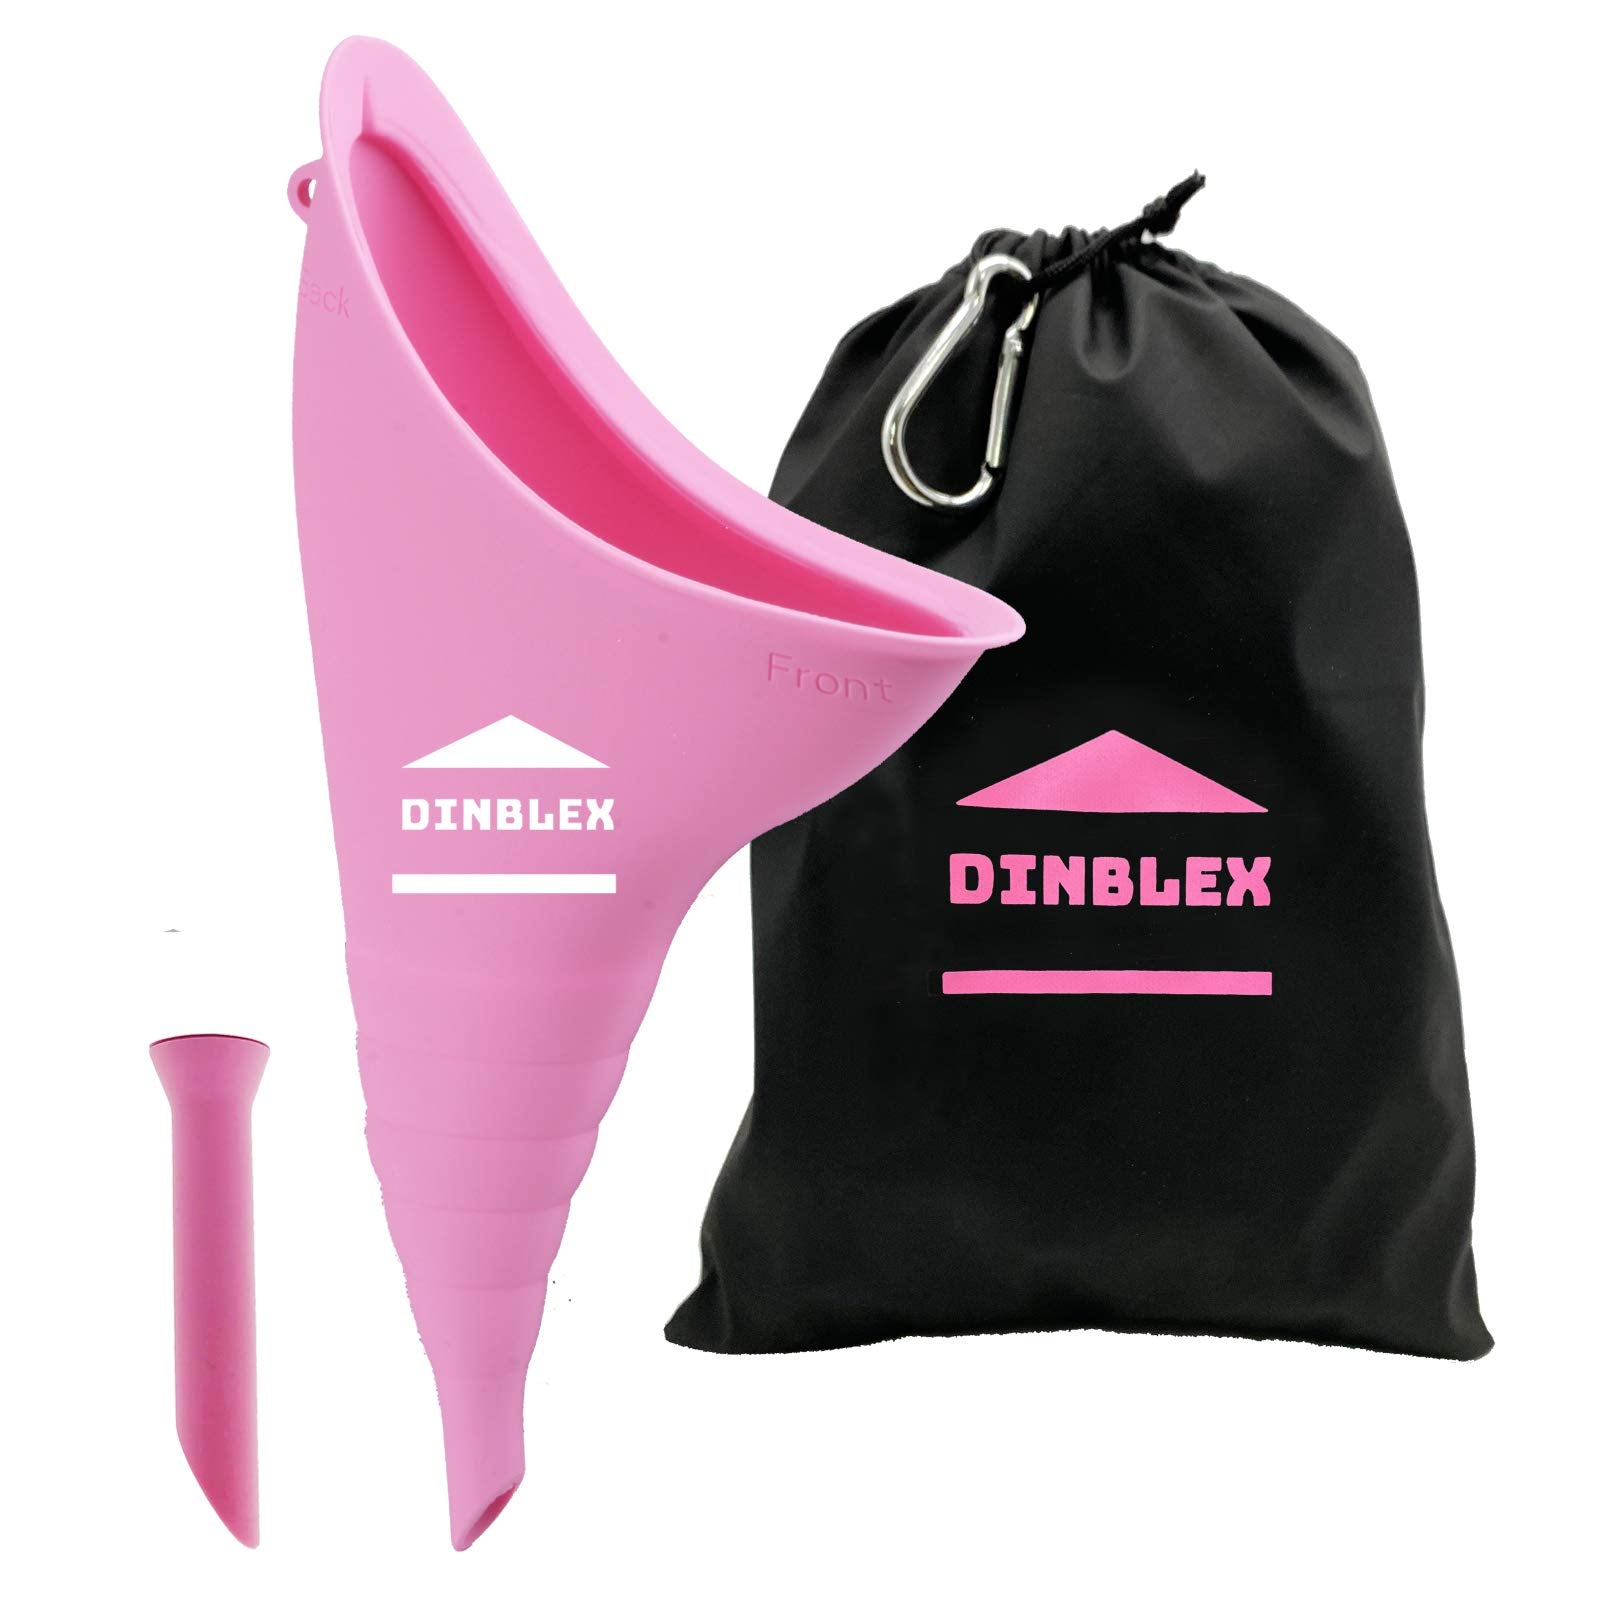 DINBLEX Female Urinal, Female Urination Device, Silicone Funnel Urine Cups Portable Urinal for Women Wee, Pee Funnel for Women Standing Up Reusable Urinator for Outdoor, Travel, Camping, Hiking